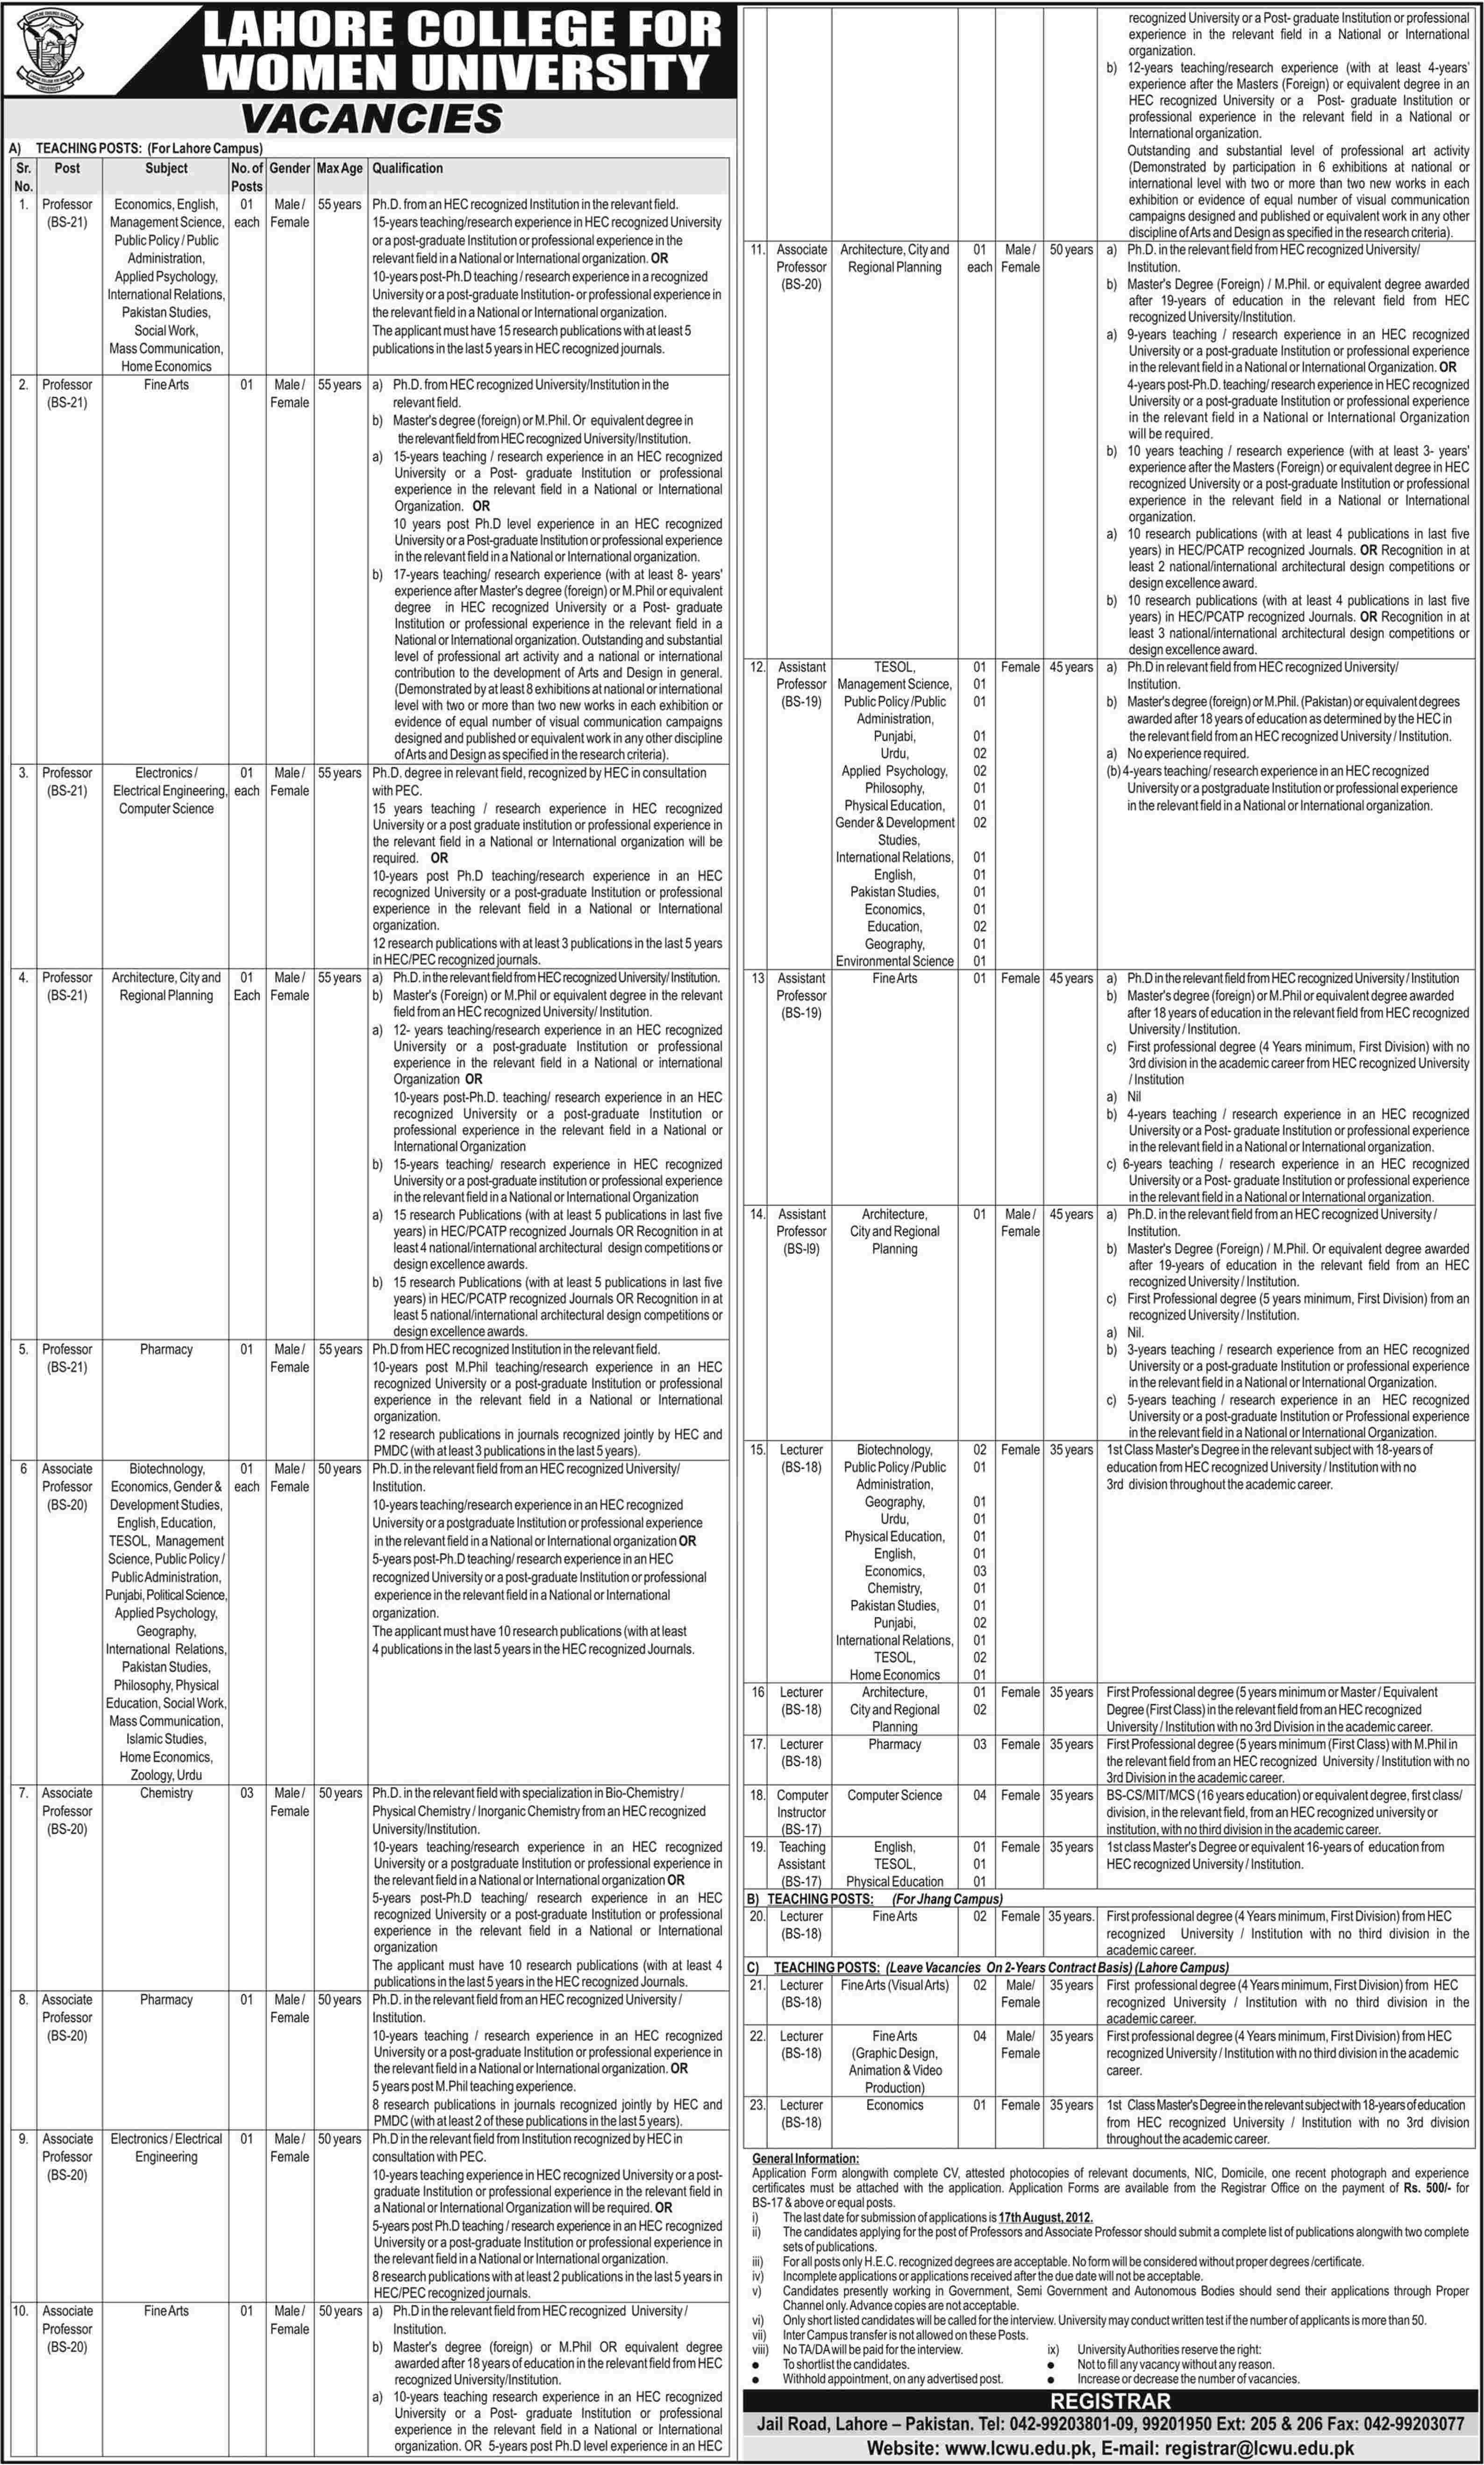 Teaching Faculty Required at Lahore College for Women University (LCWU) (Governmen Job)